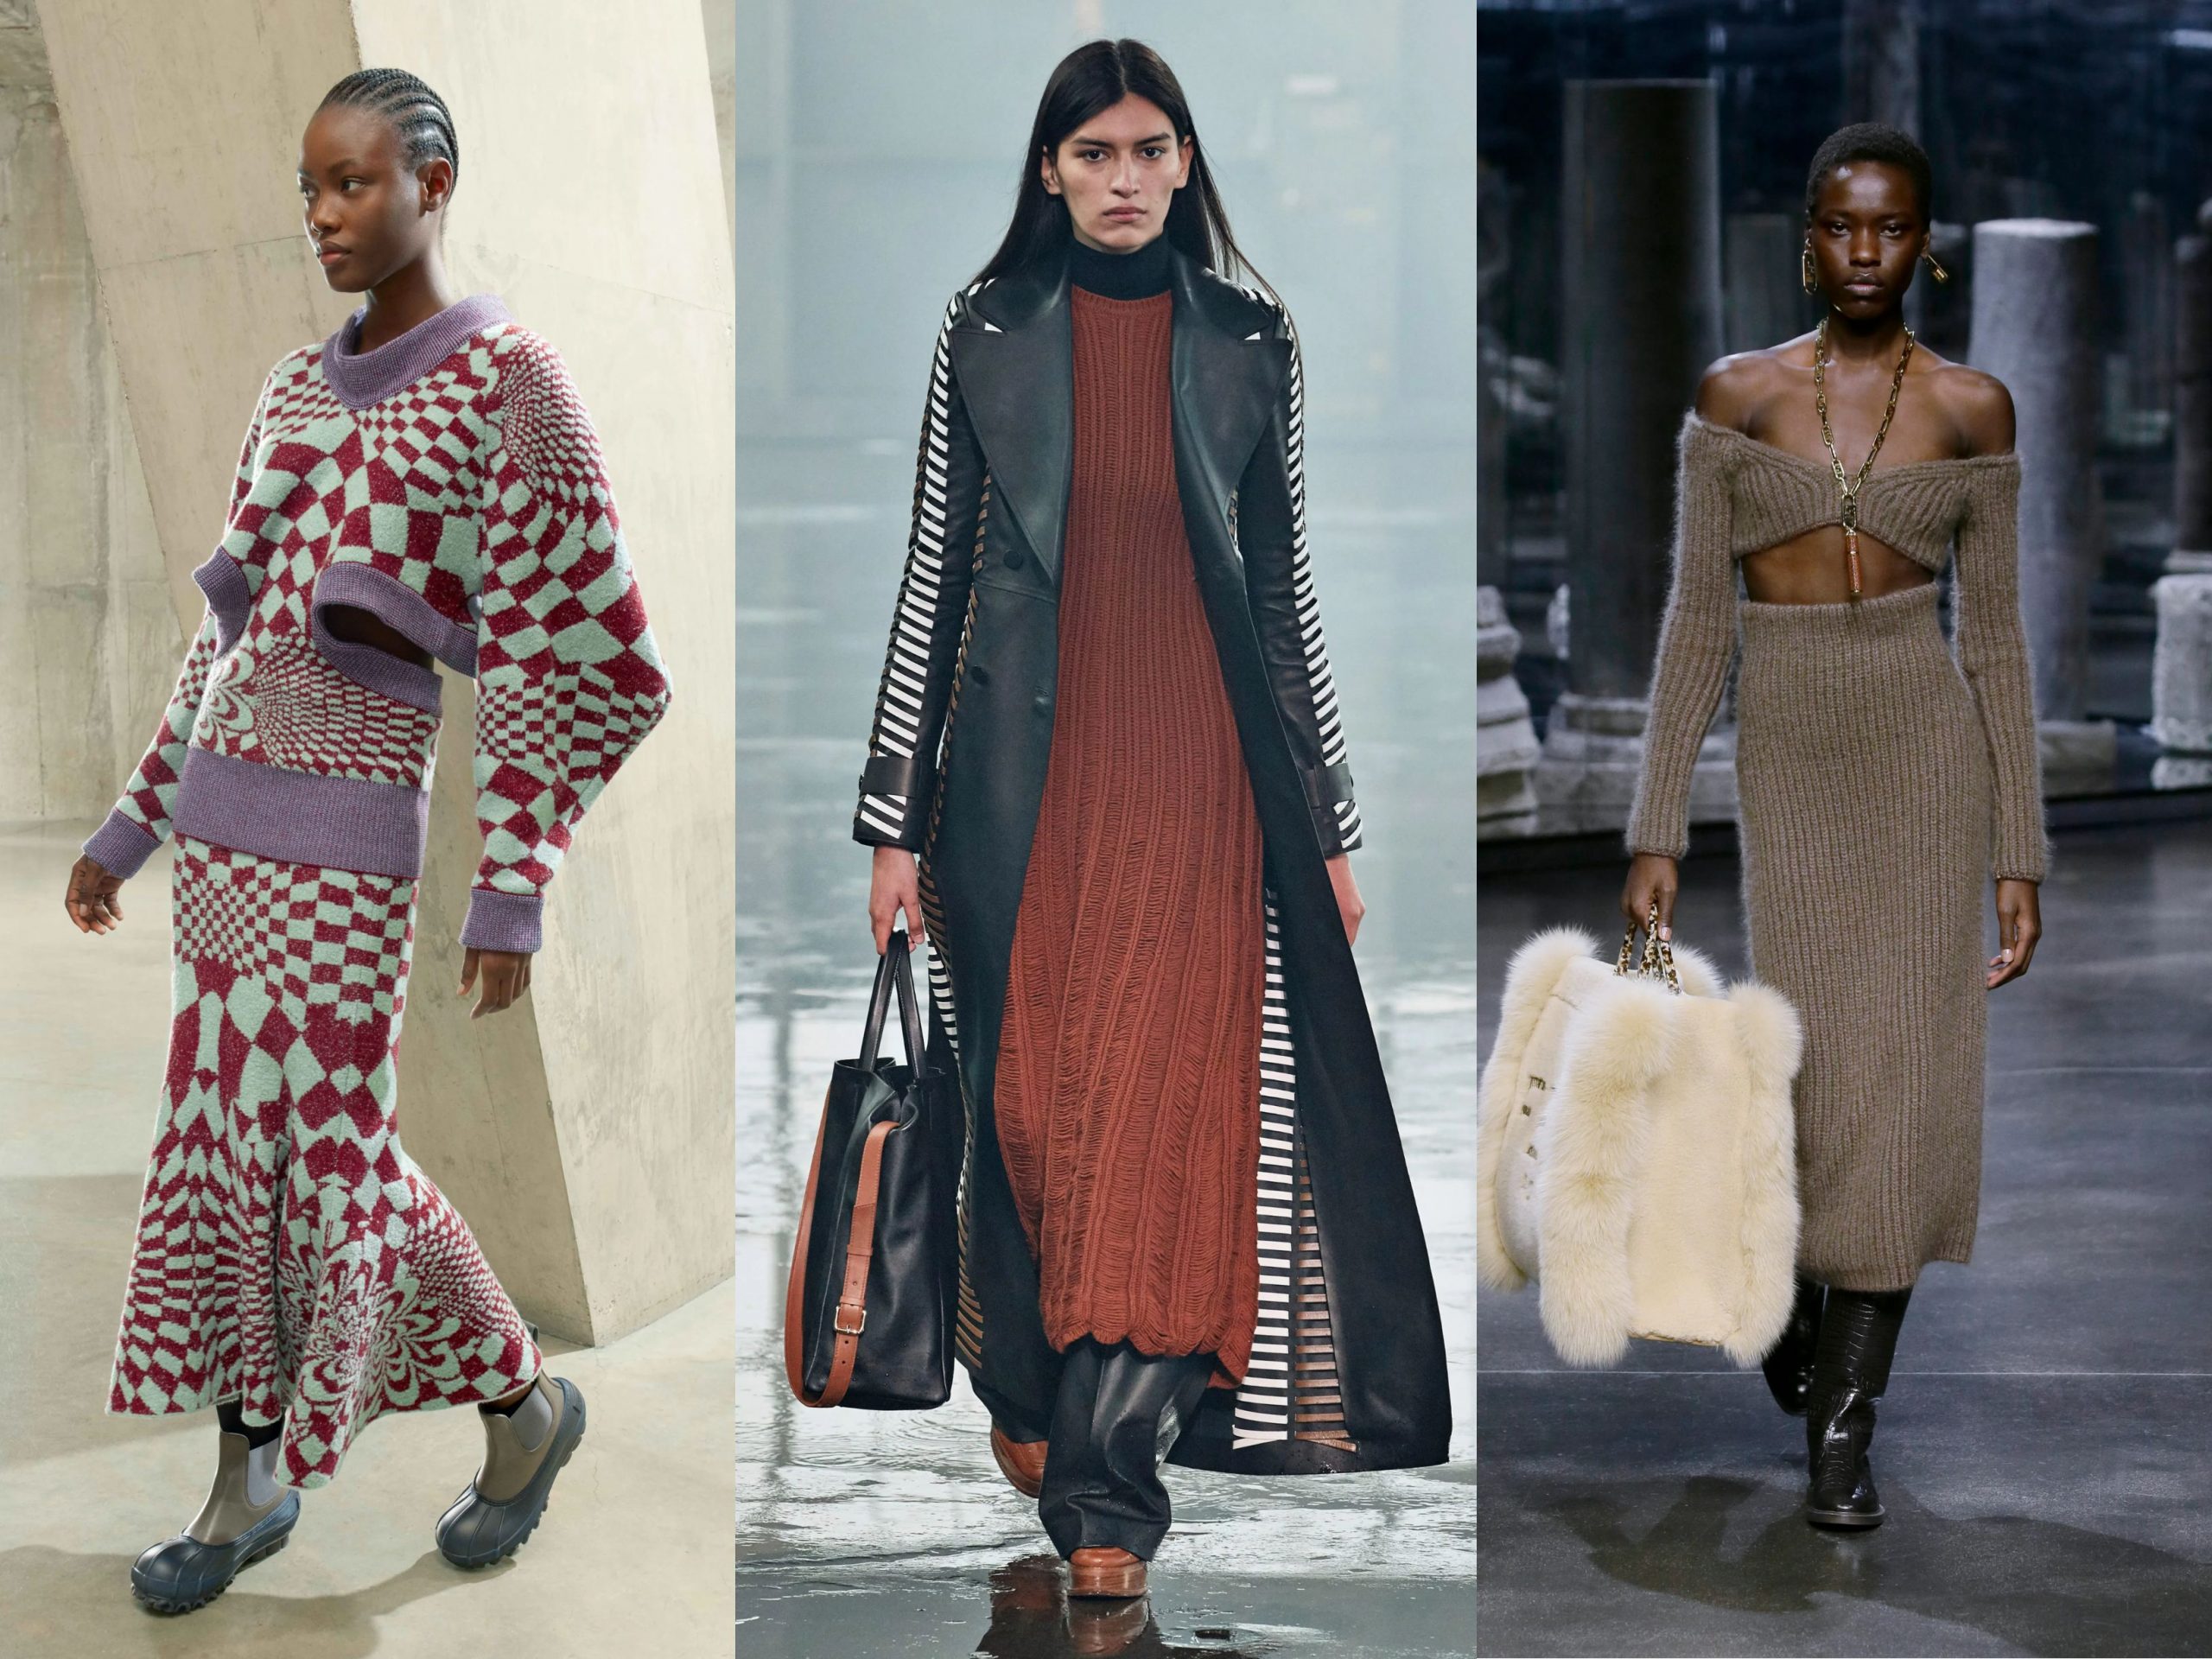 Models wearing AW21 trends the knitted dress